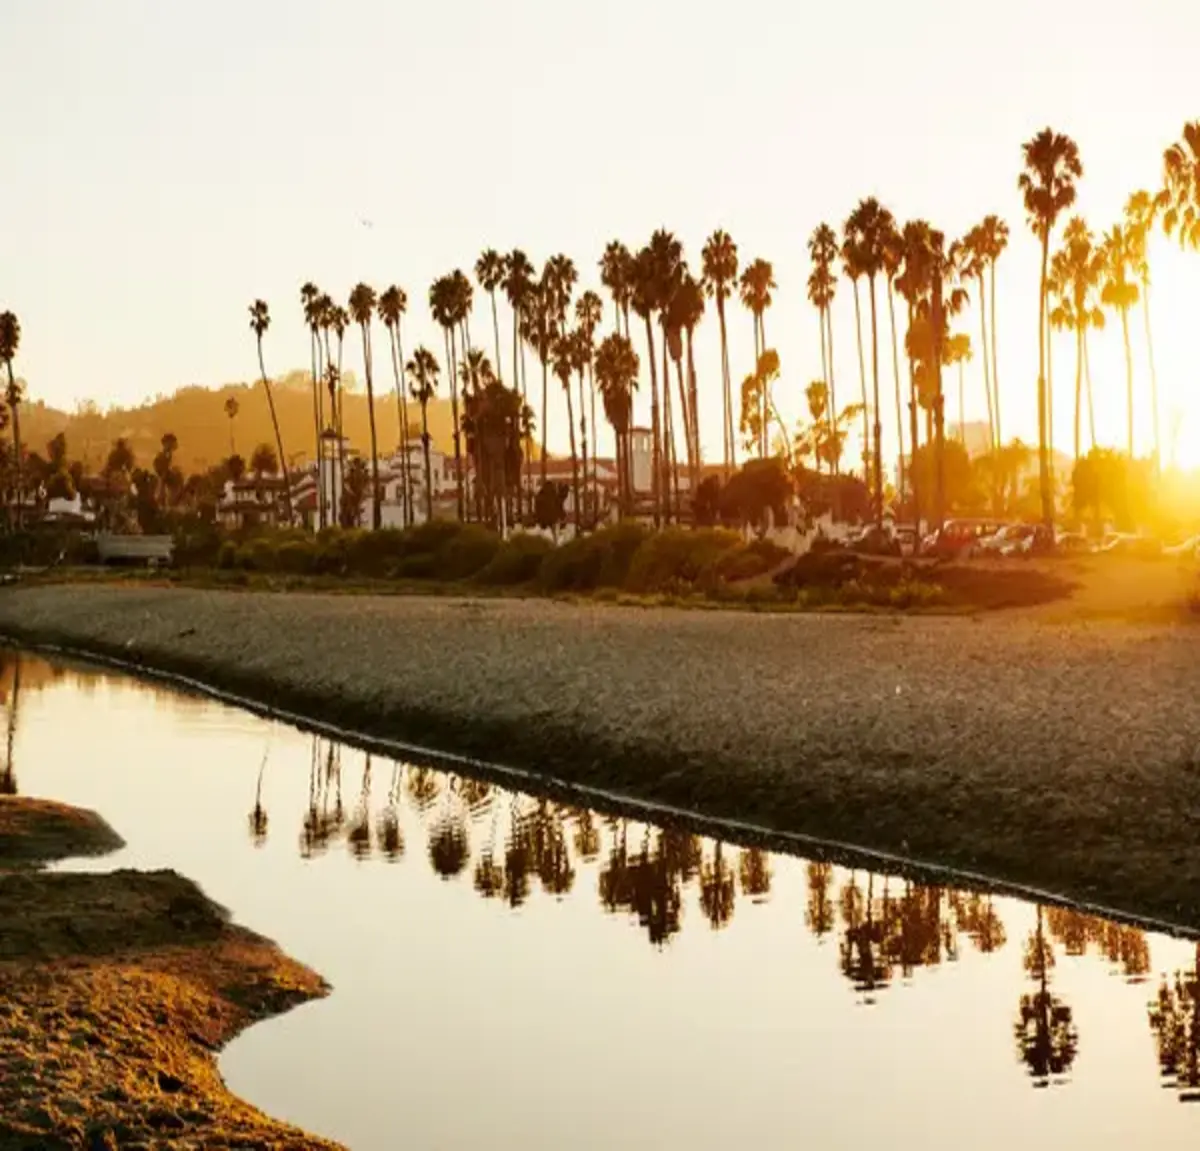 How to Make the Most of 36 Hours in Santa Monica